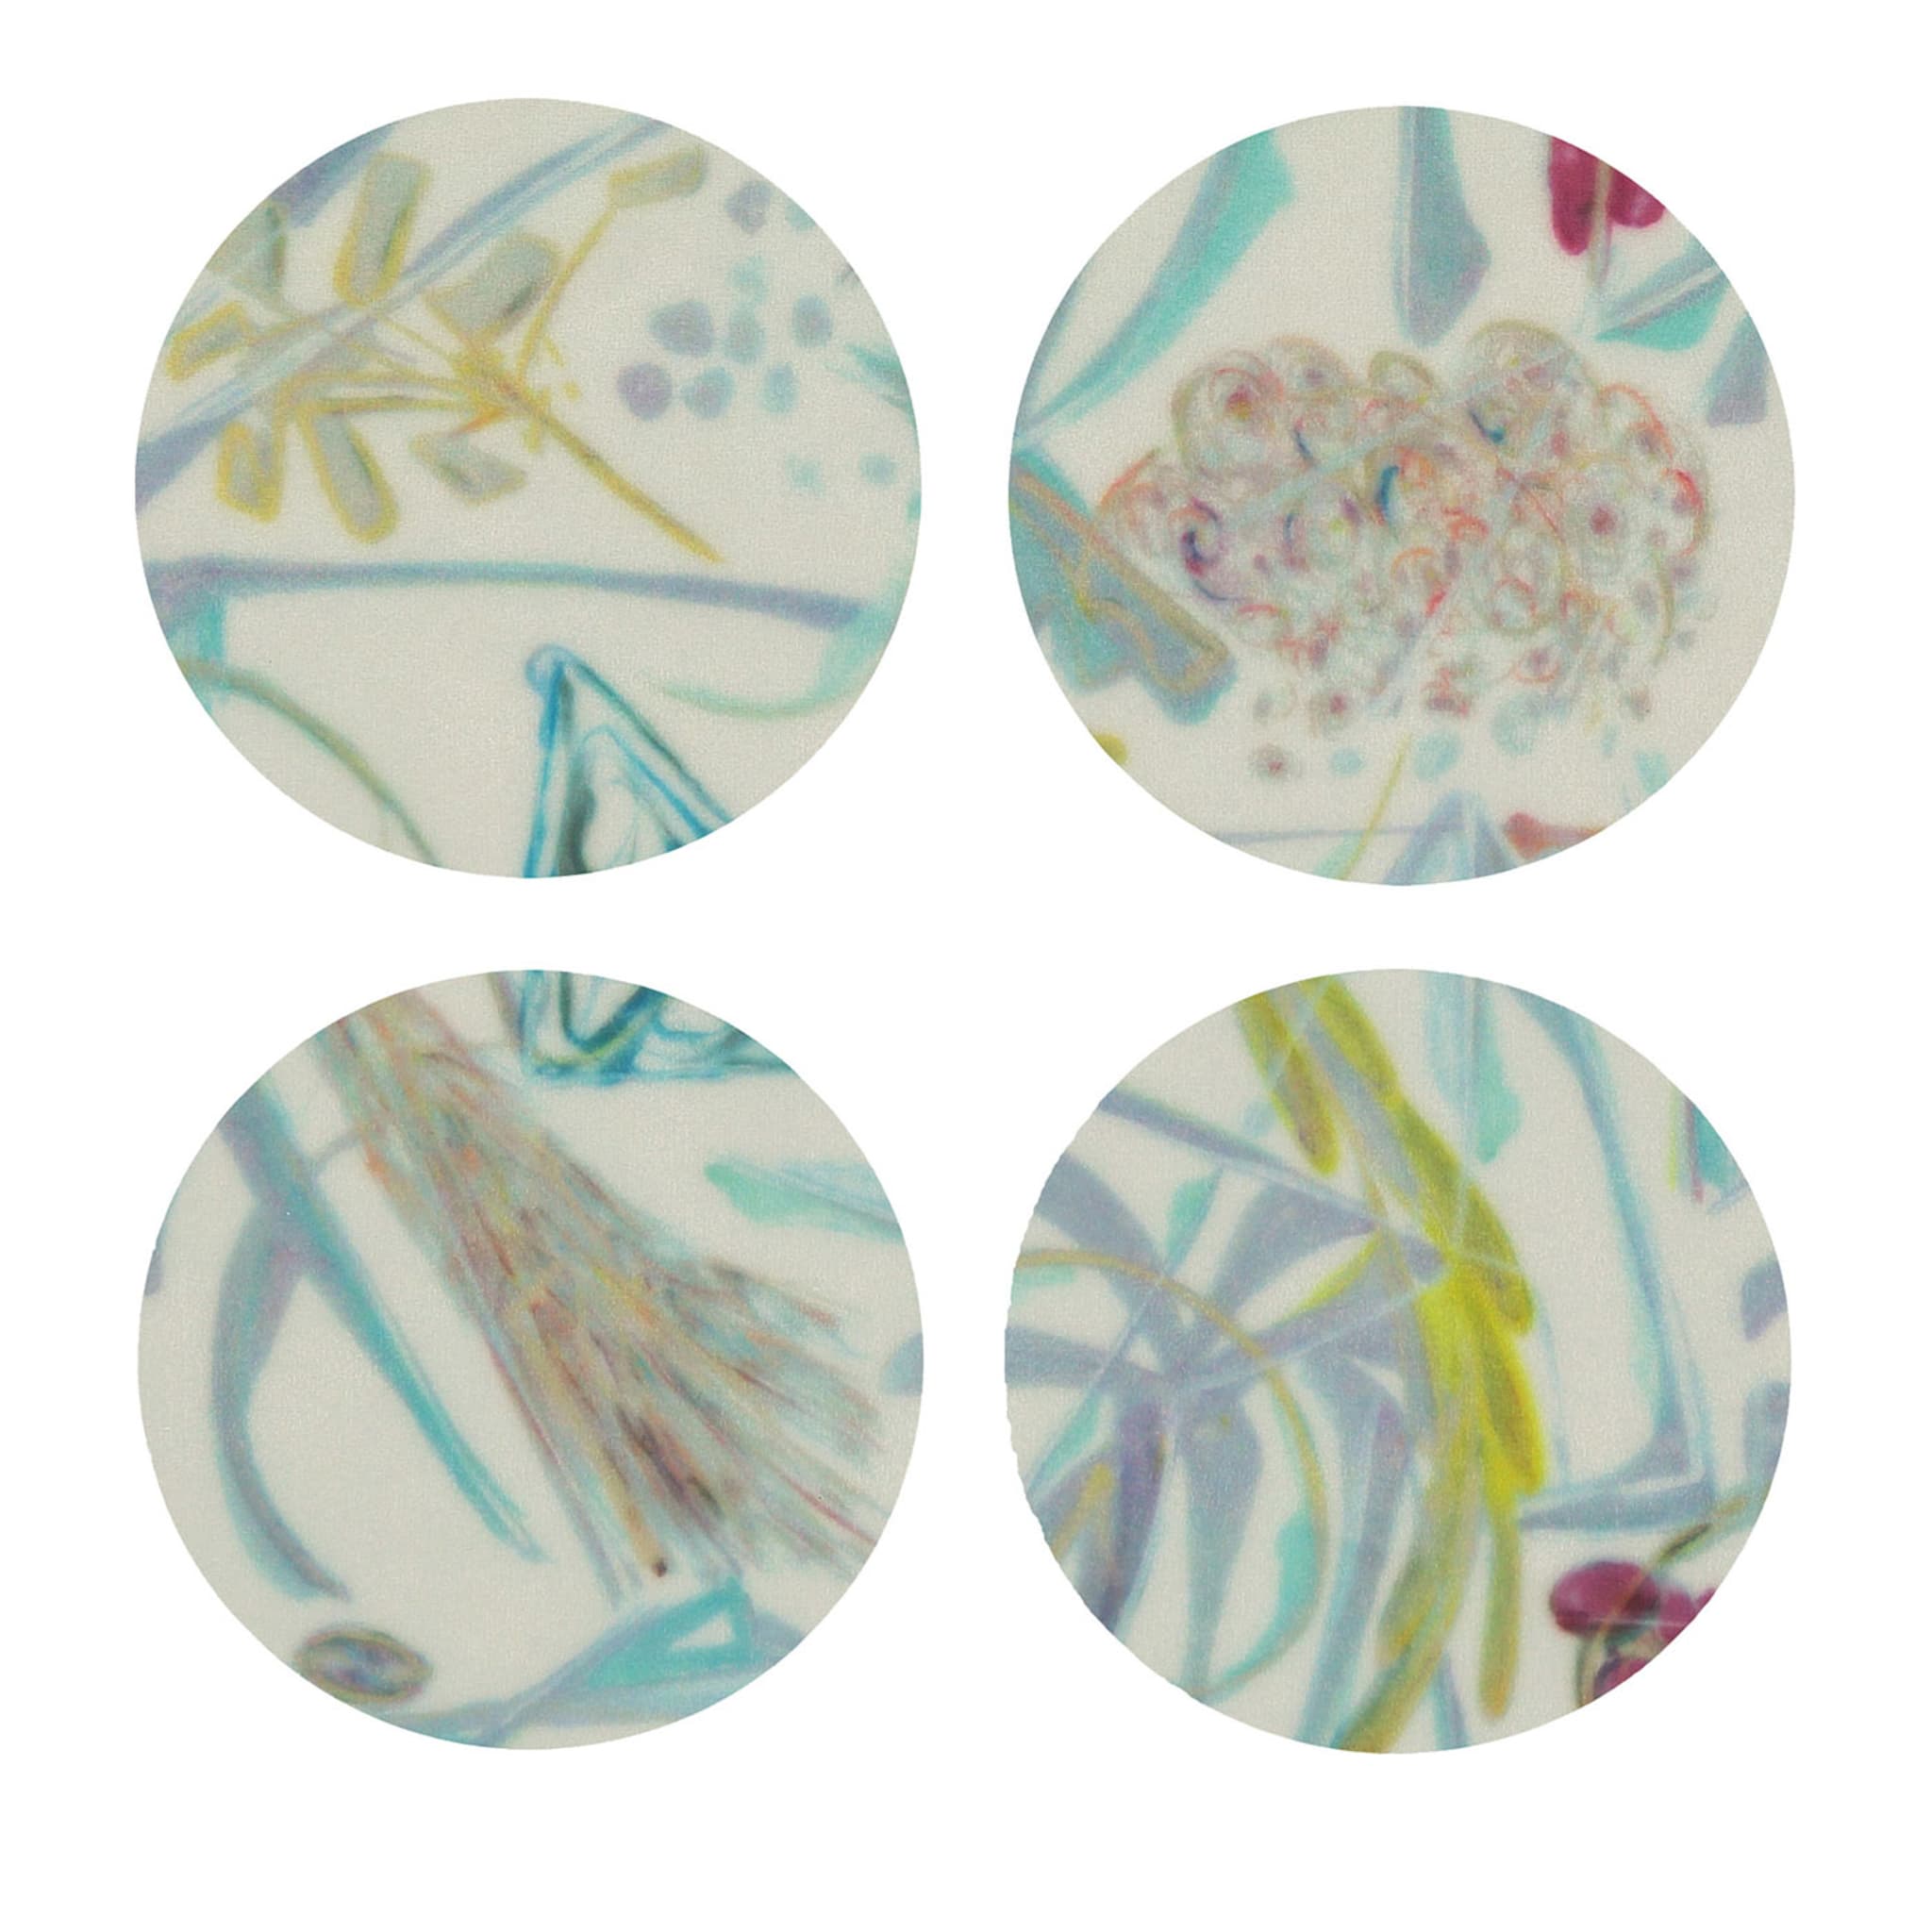 Panarea Set of 8 Patterned Polychrome Multicolor Coasters  - Main view